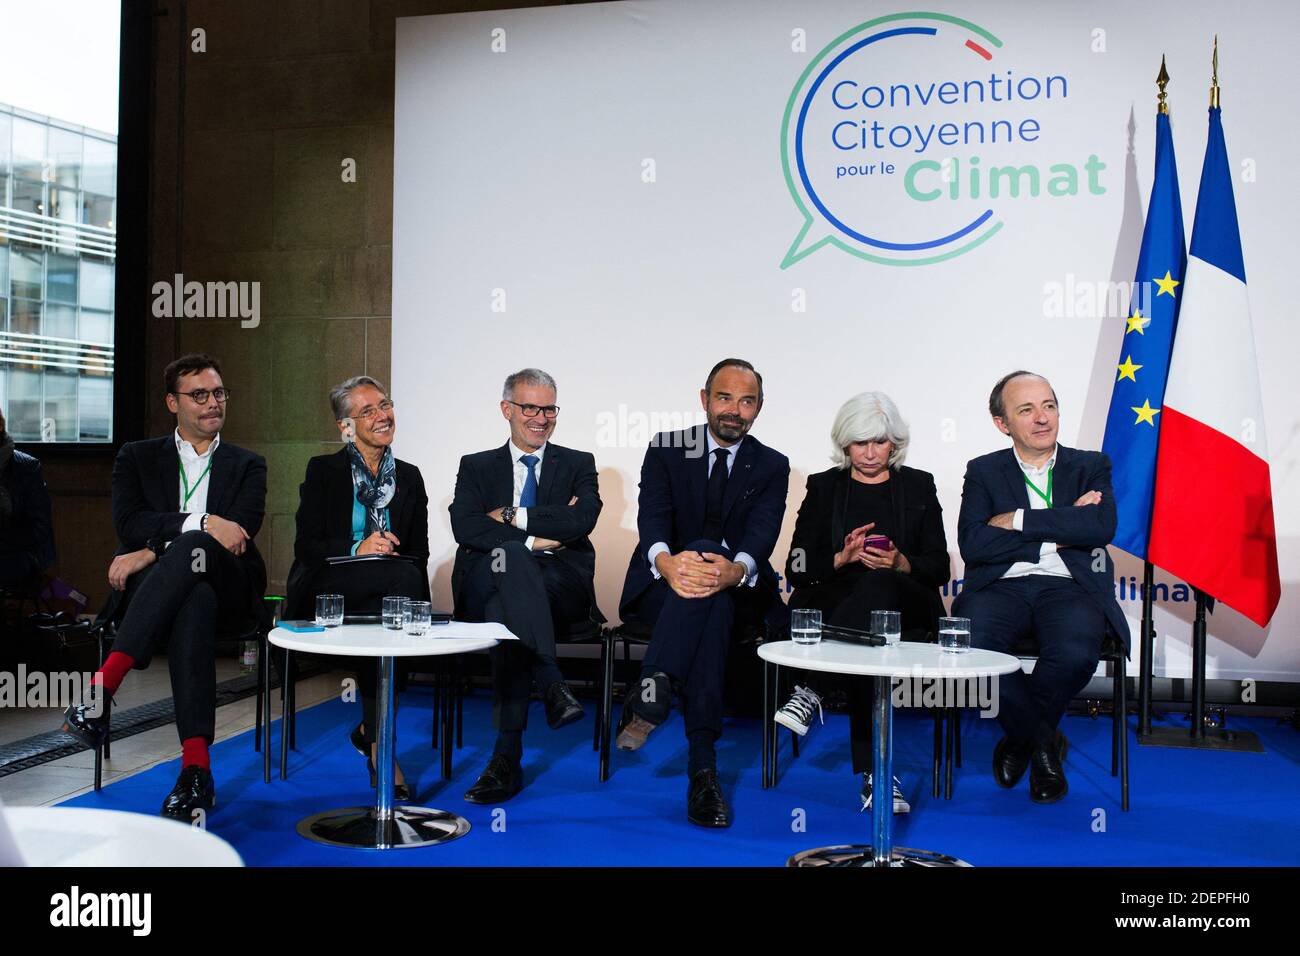 Fench Prime Minister Edouard Philippe, Economist Laurence Tubiana, French Minister for the Ecological and Inclusive Transition Elisabeth Borne, president of the CESE Patrick Bernasconi and Thierry Pech at the Citizens' Convention for Climate held at the French Conseil economique, social et environnemental (CESE - Economic, Social and Environmental Council) in Paris, 04 October 2019 Photo by Raphaël Lafargue/ABACAPRESS.COM Stock Photo